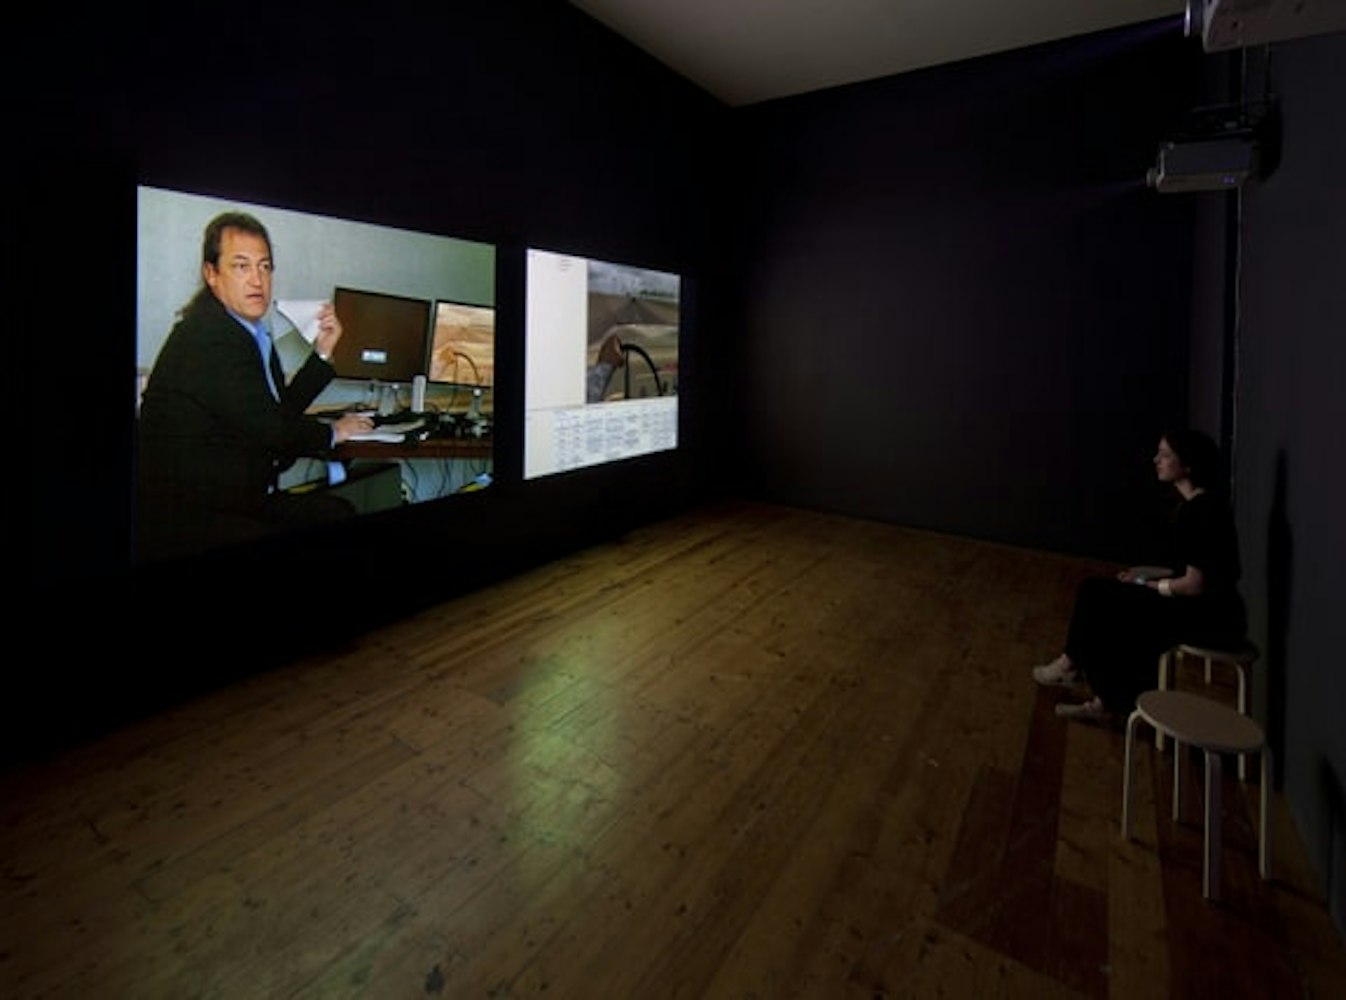 Harun Farocki, The Tall Man, 2011, installation at Gertrude Contemporary. Image courtesy of the Gertrude Contemporary archives.